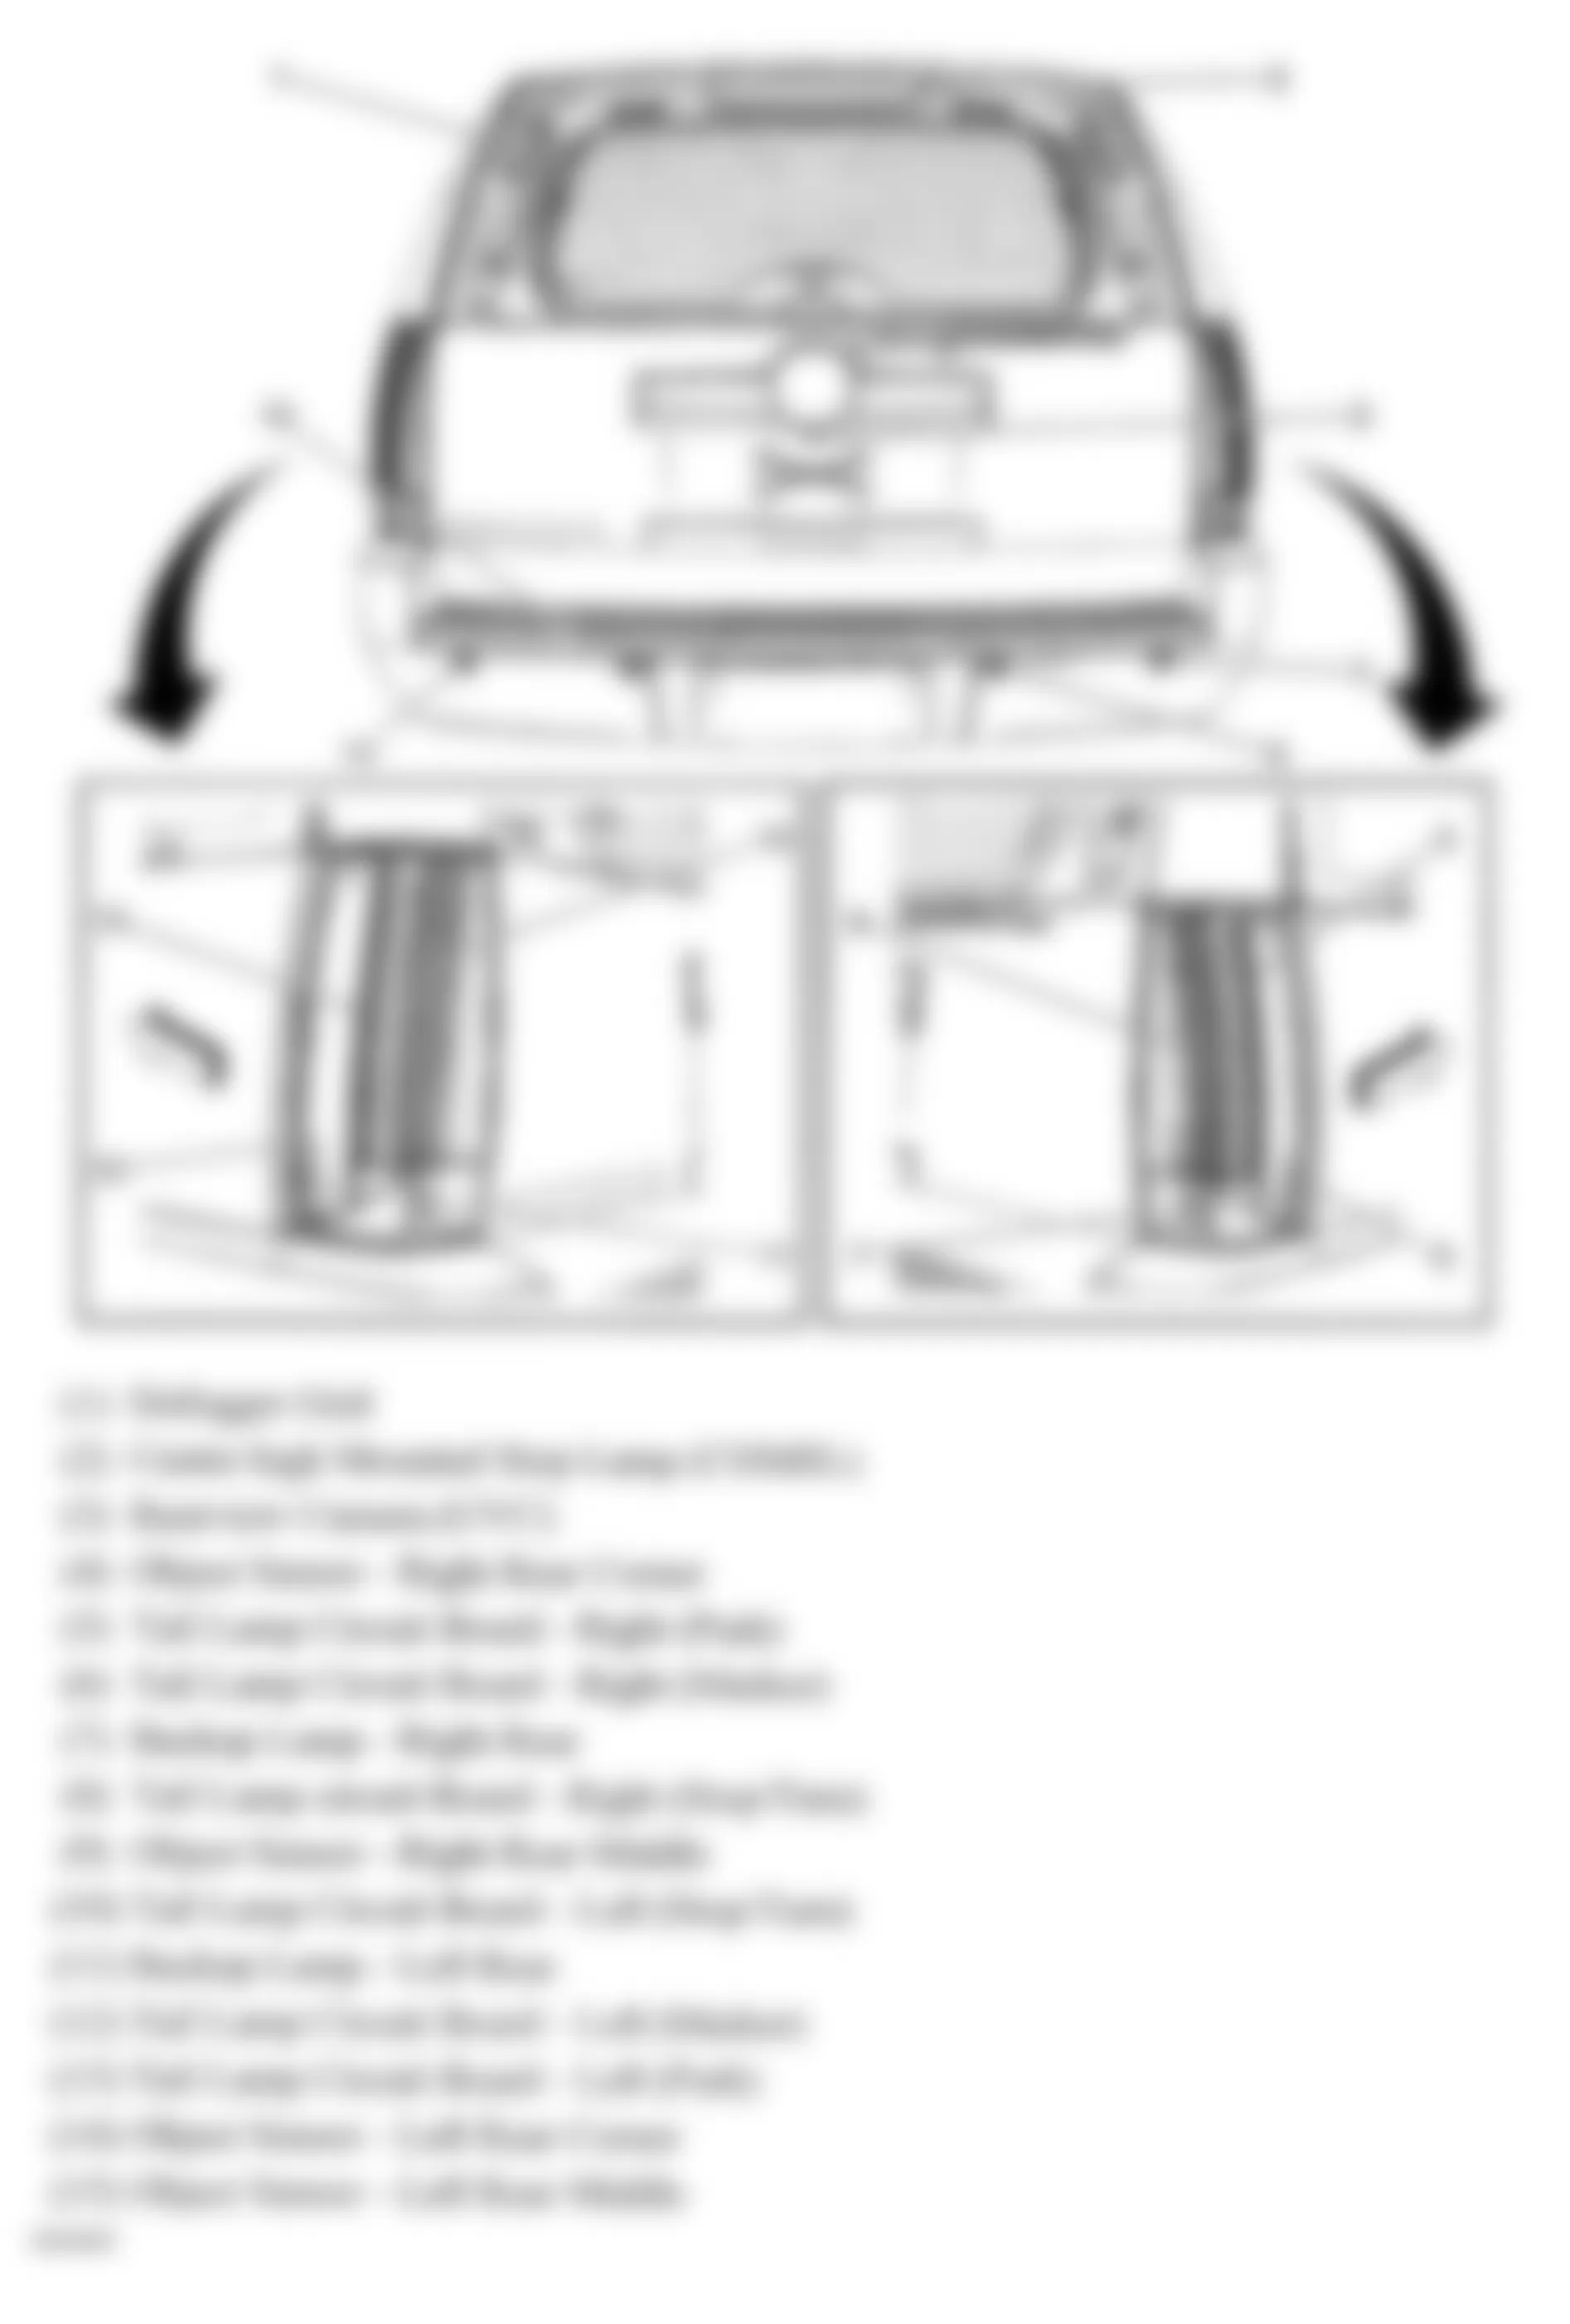 GMC Yukon 2007 - Component Locations -  Rear Of Vehicle (Tahoe & Escalade W/One Piece Liftgate)